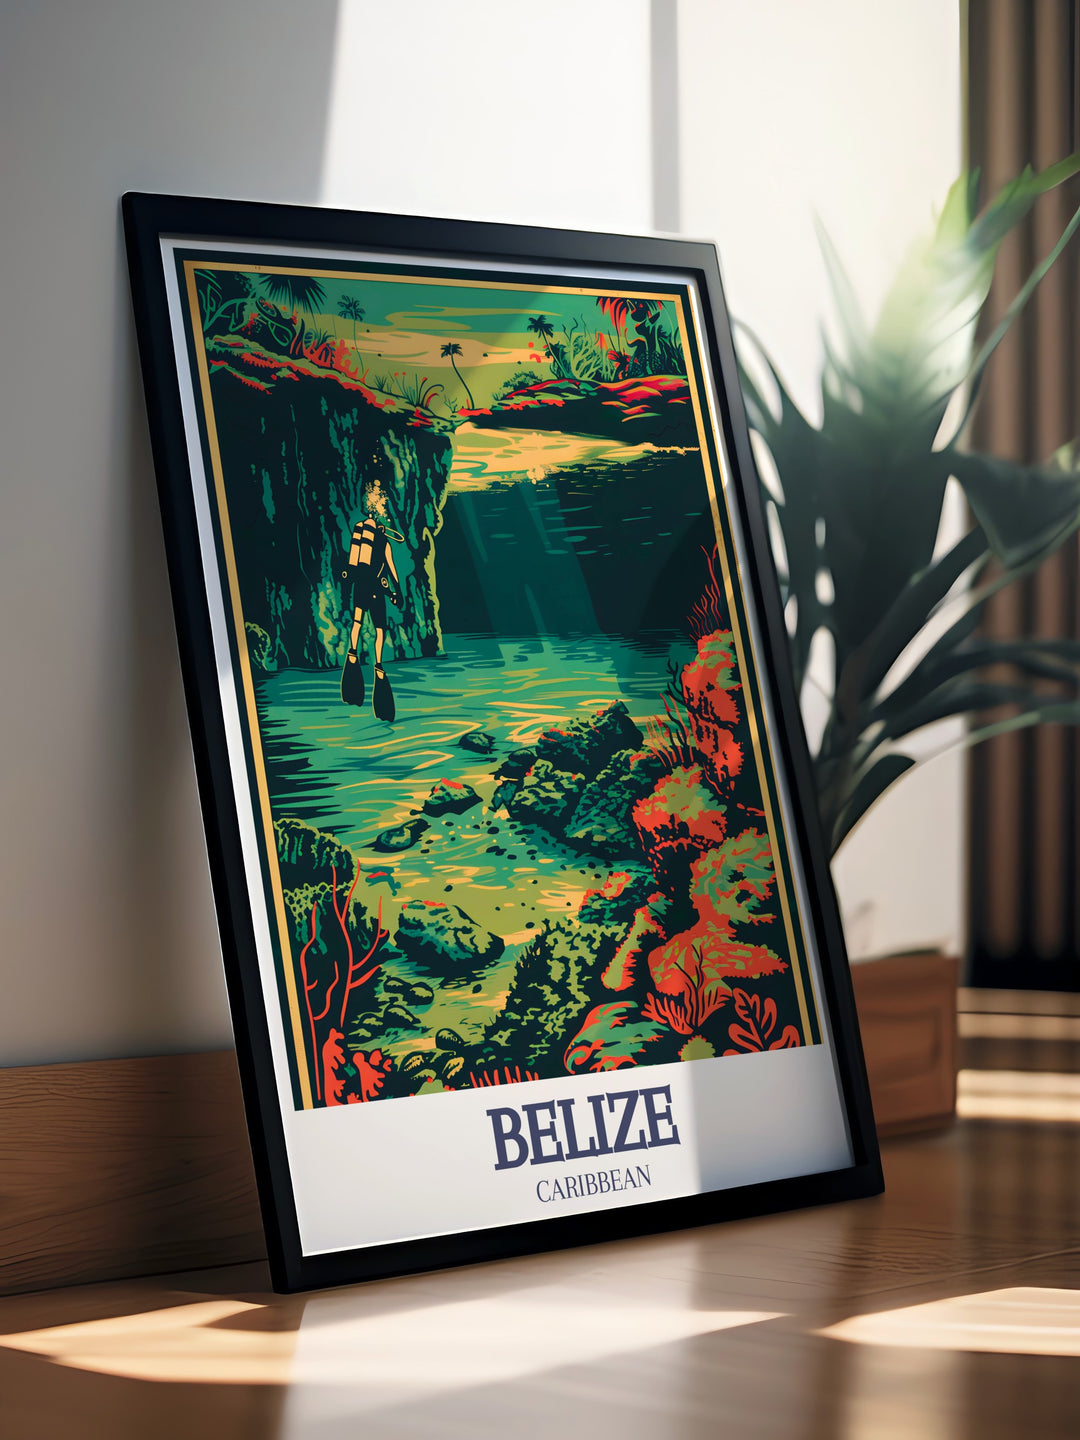 Blue Hole Belize Barrier Reef vintage print showcasing the colorful underwater world of the Caribbean perfect for art and travel lovers adding a unique and captivating element to your home decor